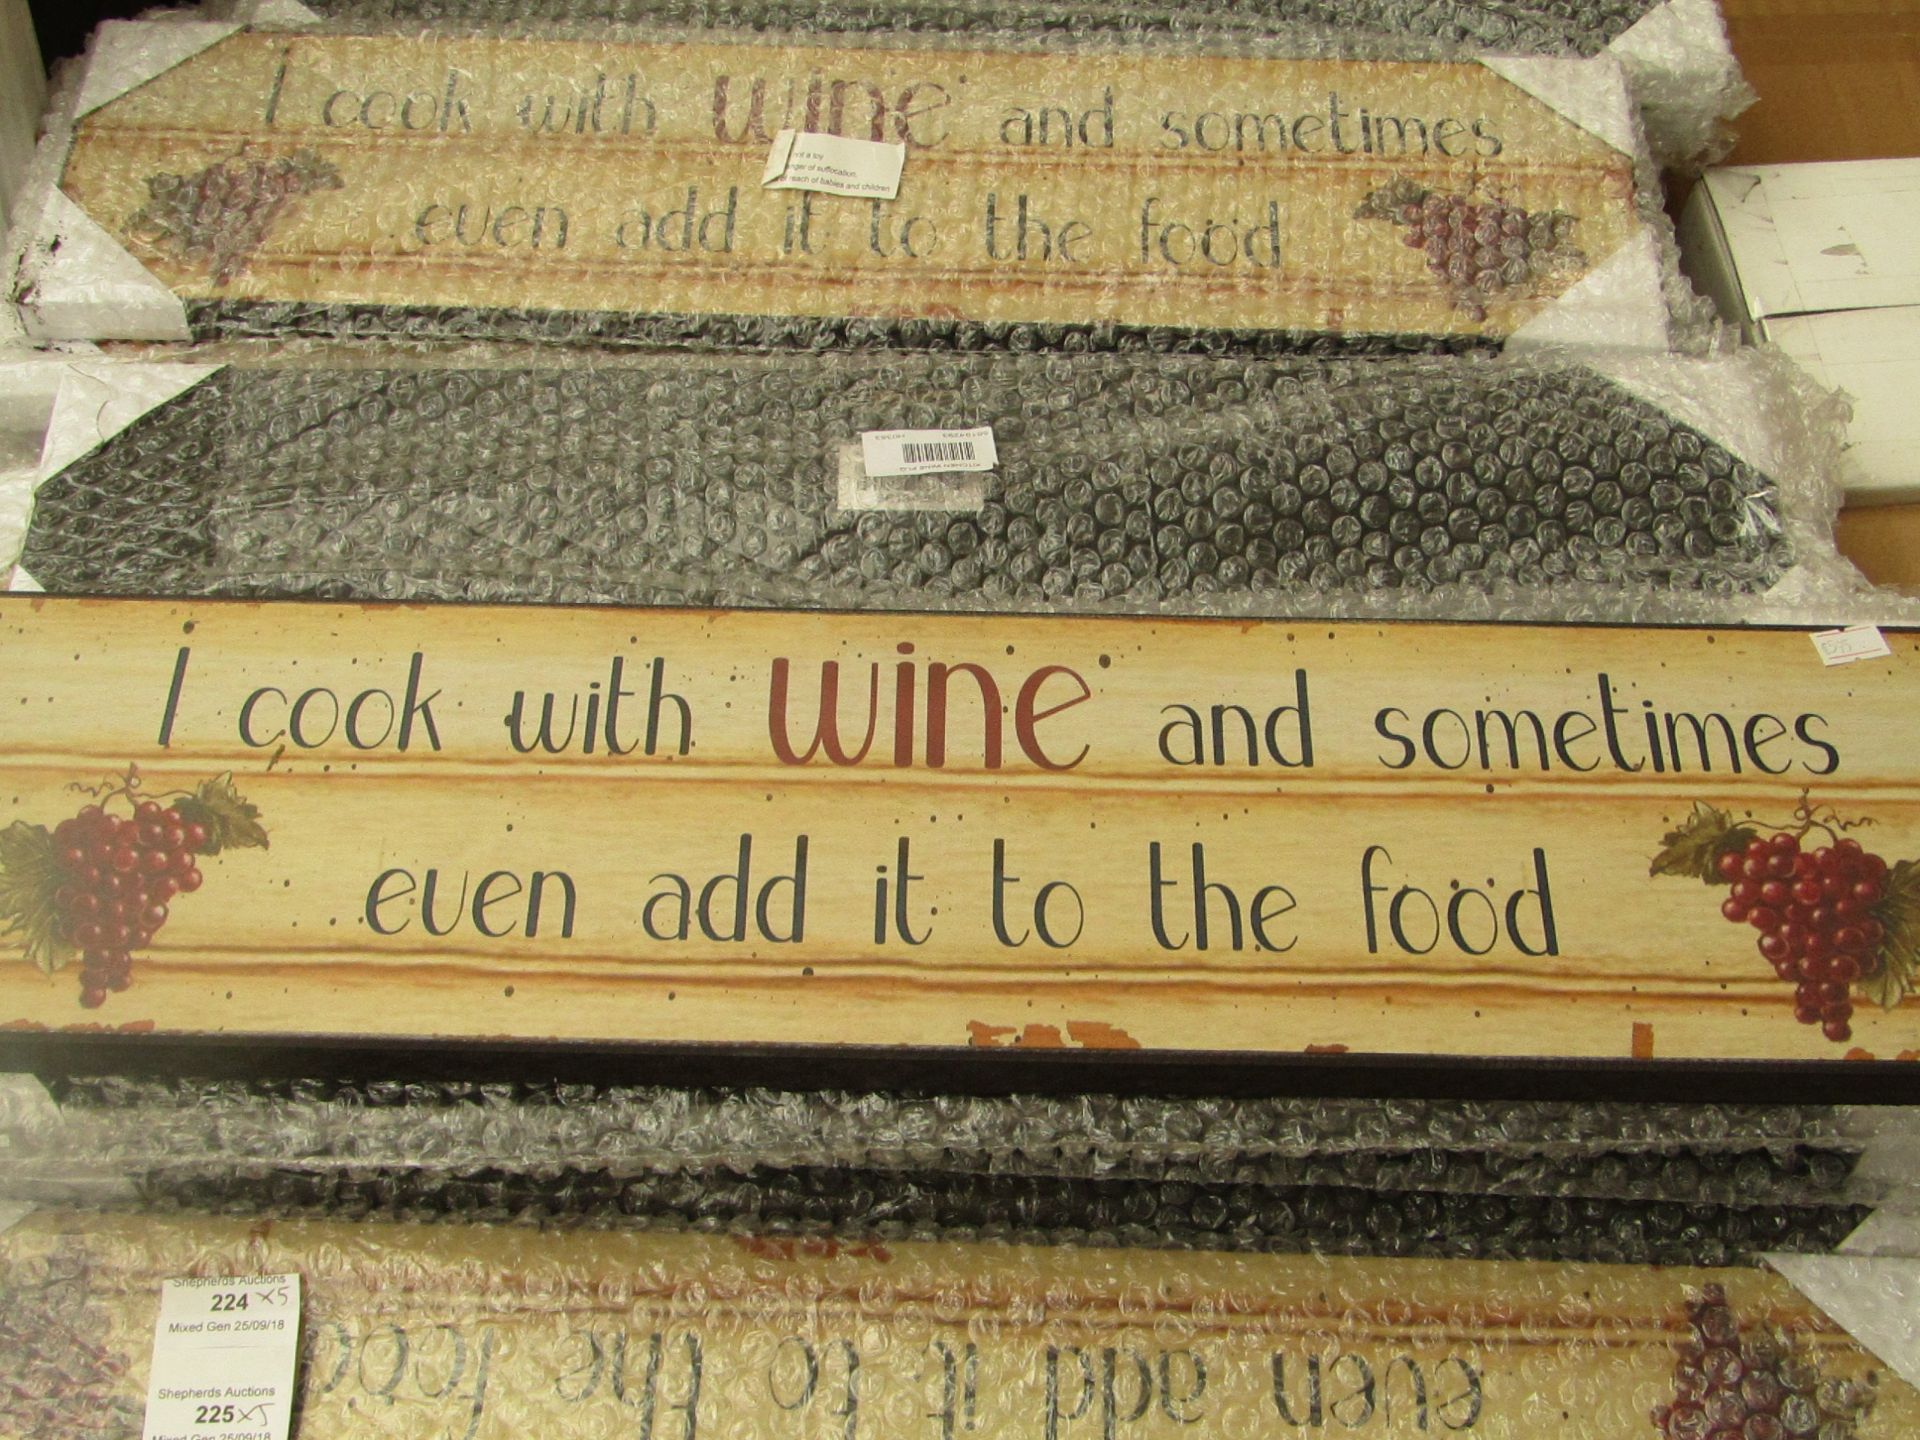 5x "I cook with wine and sometimes even add it to the food" decorative plaques, all new.